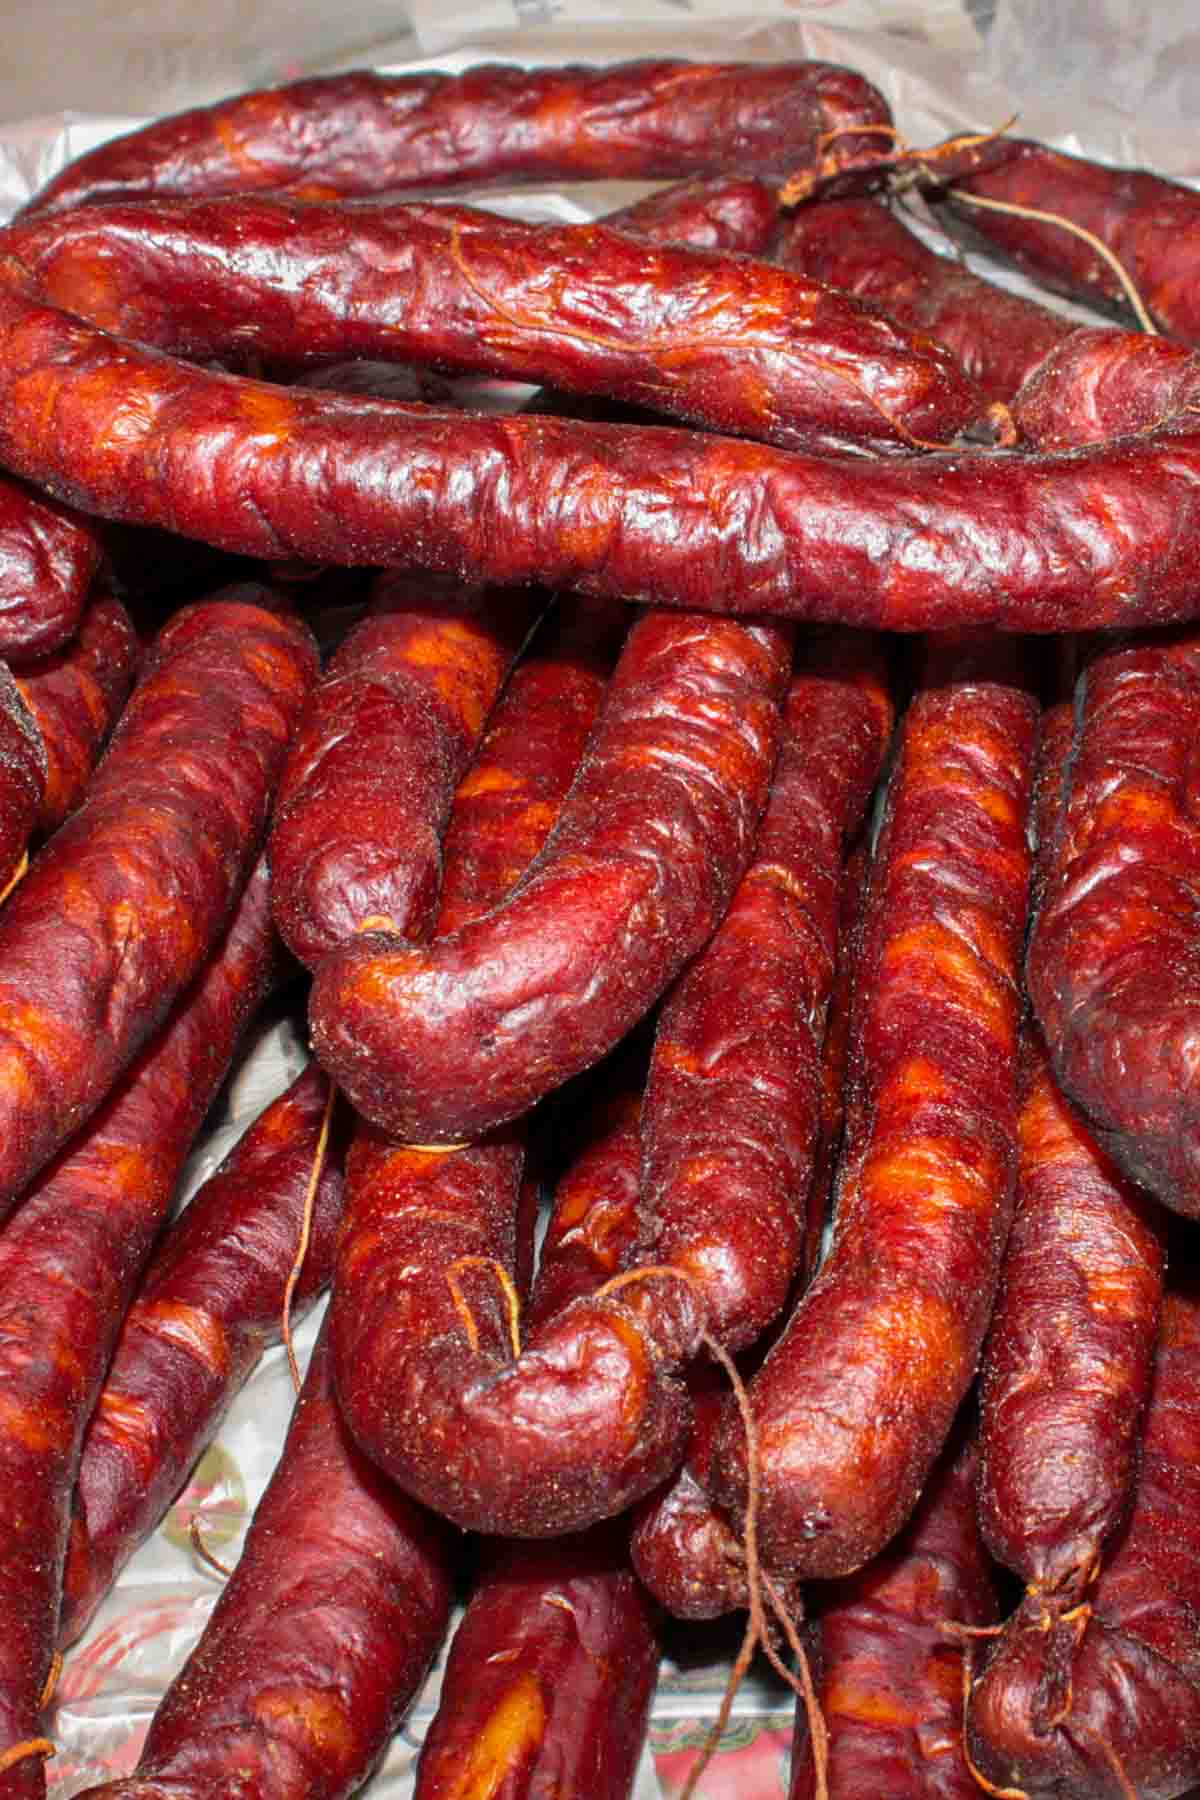 A pile of dried Portuguese sausage on a table.